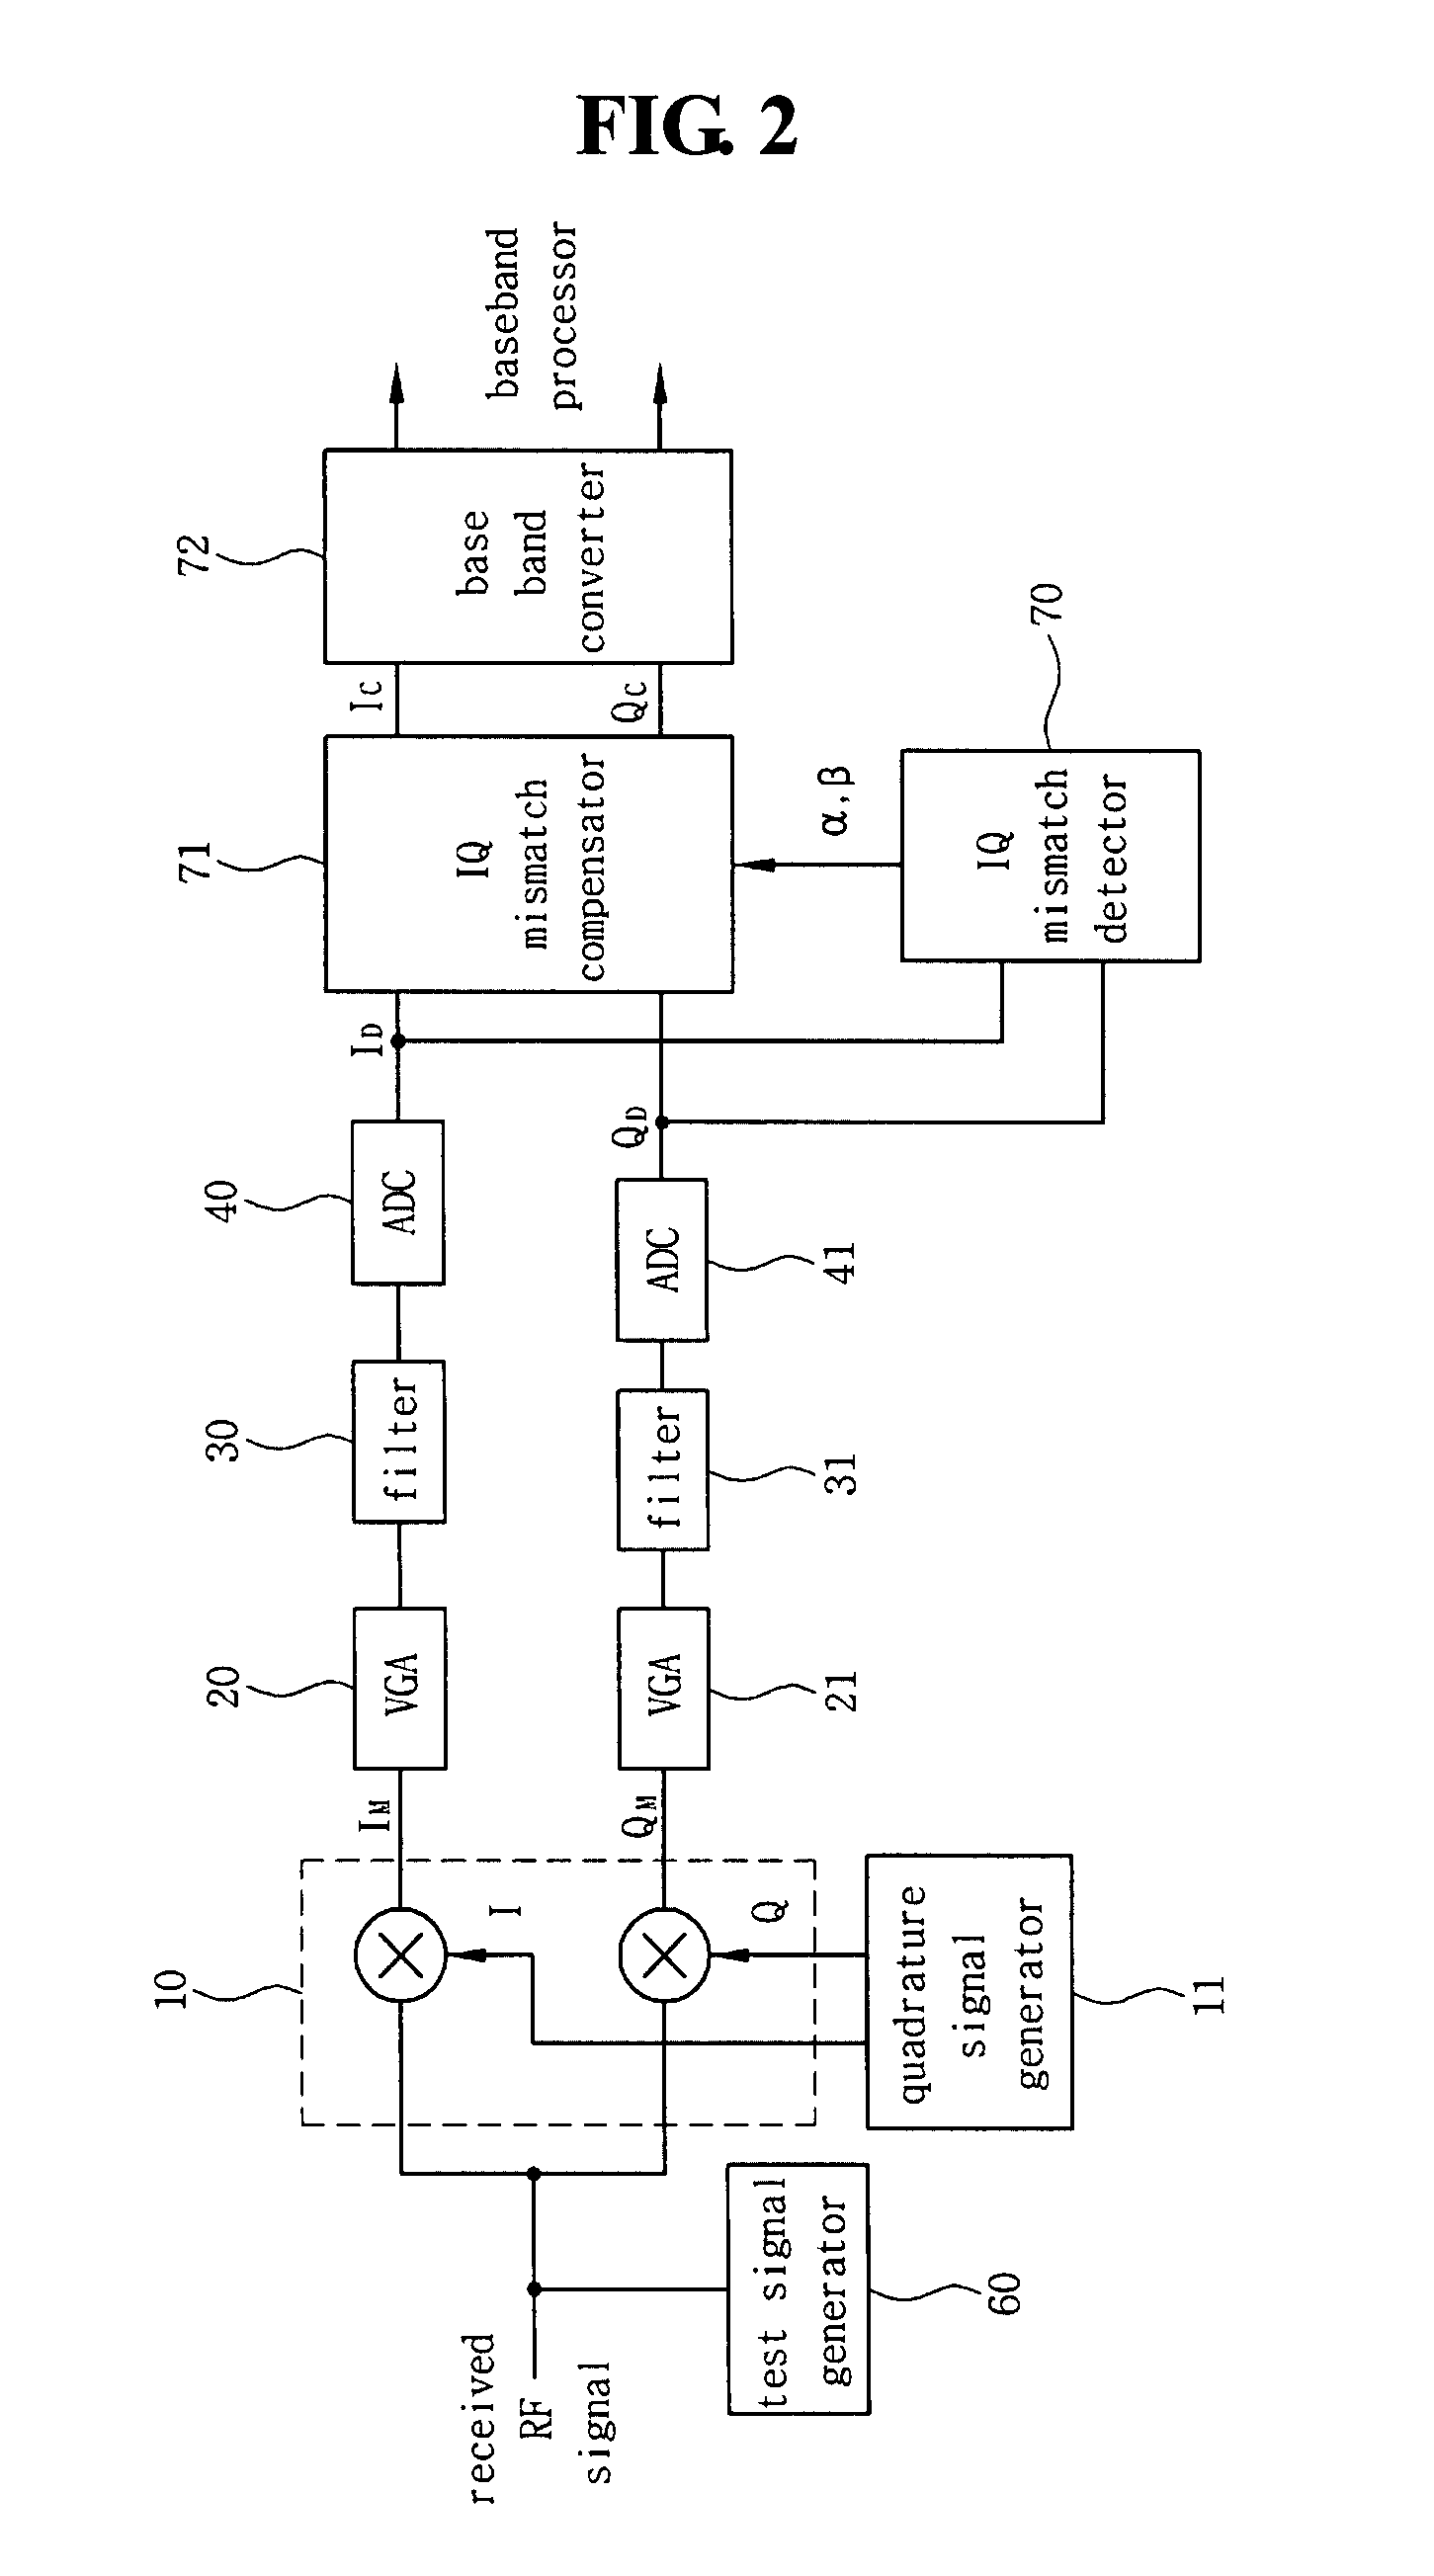 Receiving circuit and method for compensating IQ mismatch